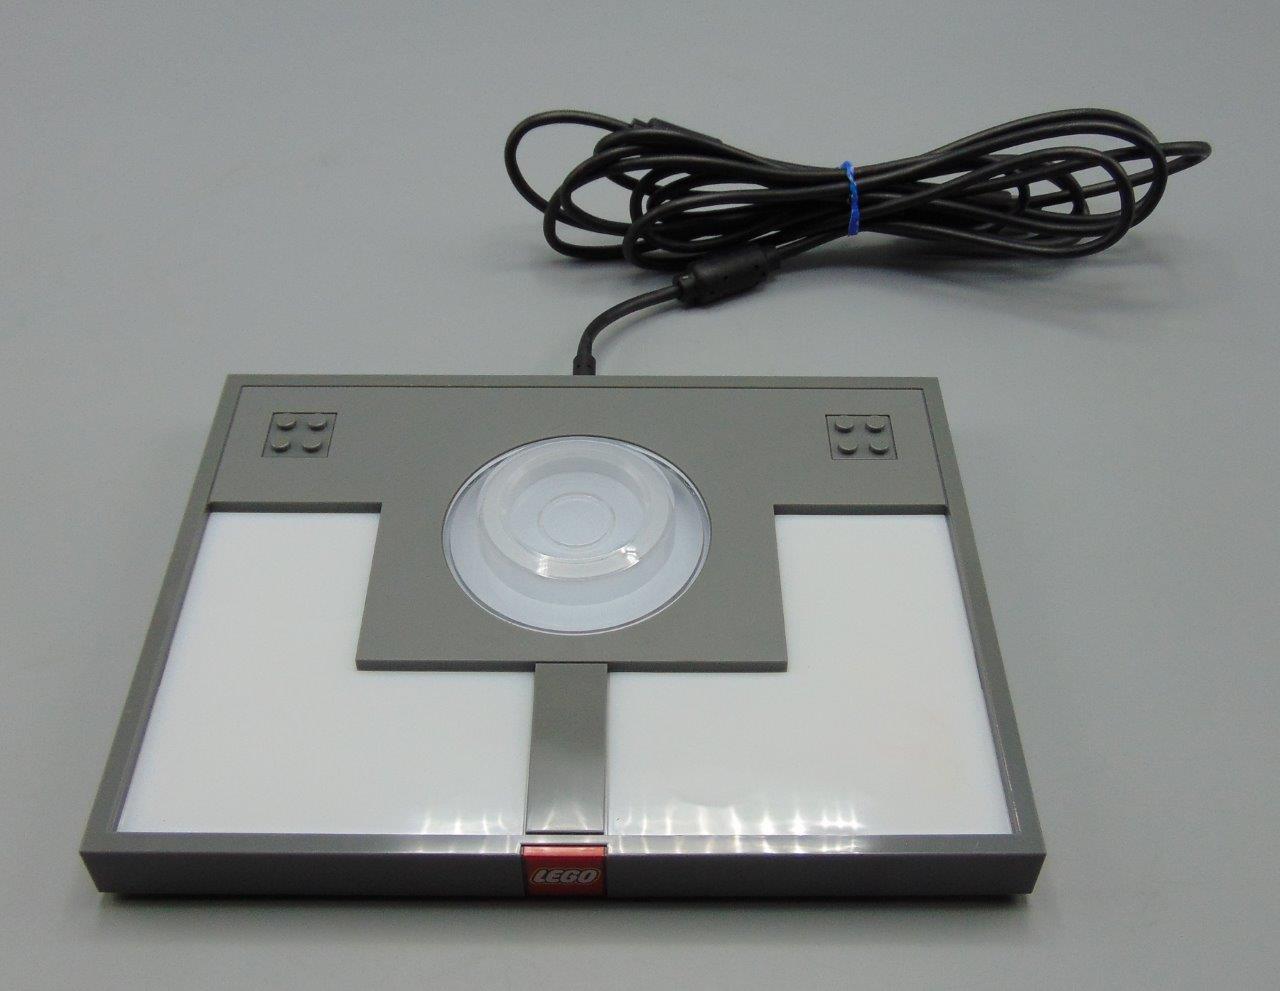 first home video console